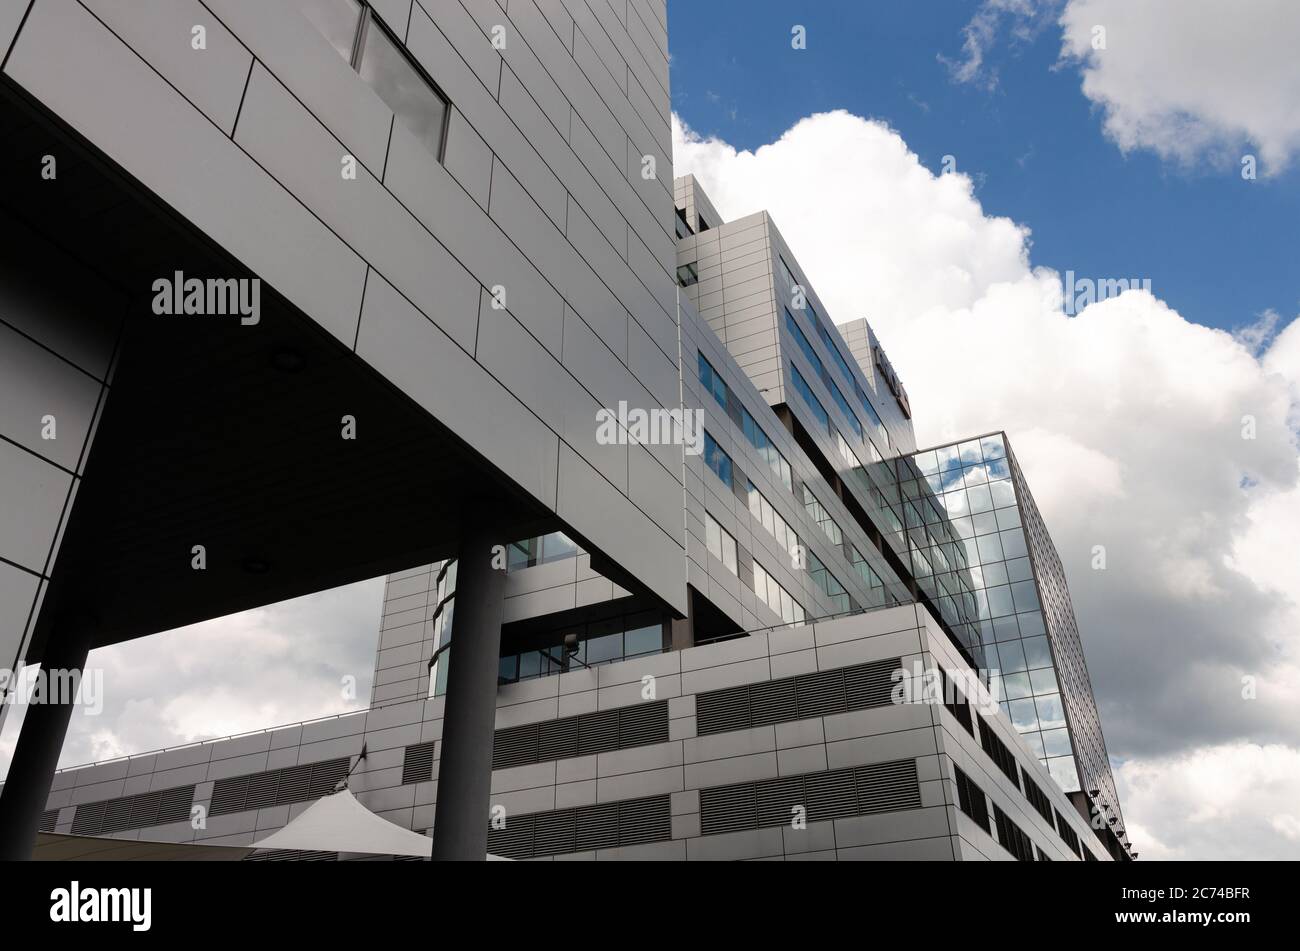 Katowice, Silesia, Poland; July 12th, 2020: Modern architecture of the ING corporate building in the city center of Katowice Stock Photo